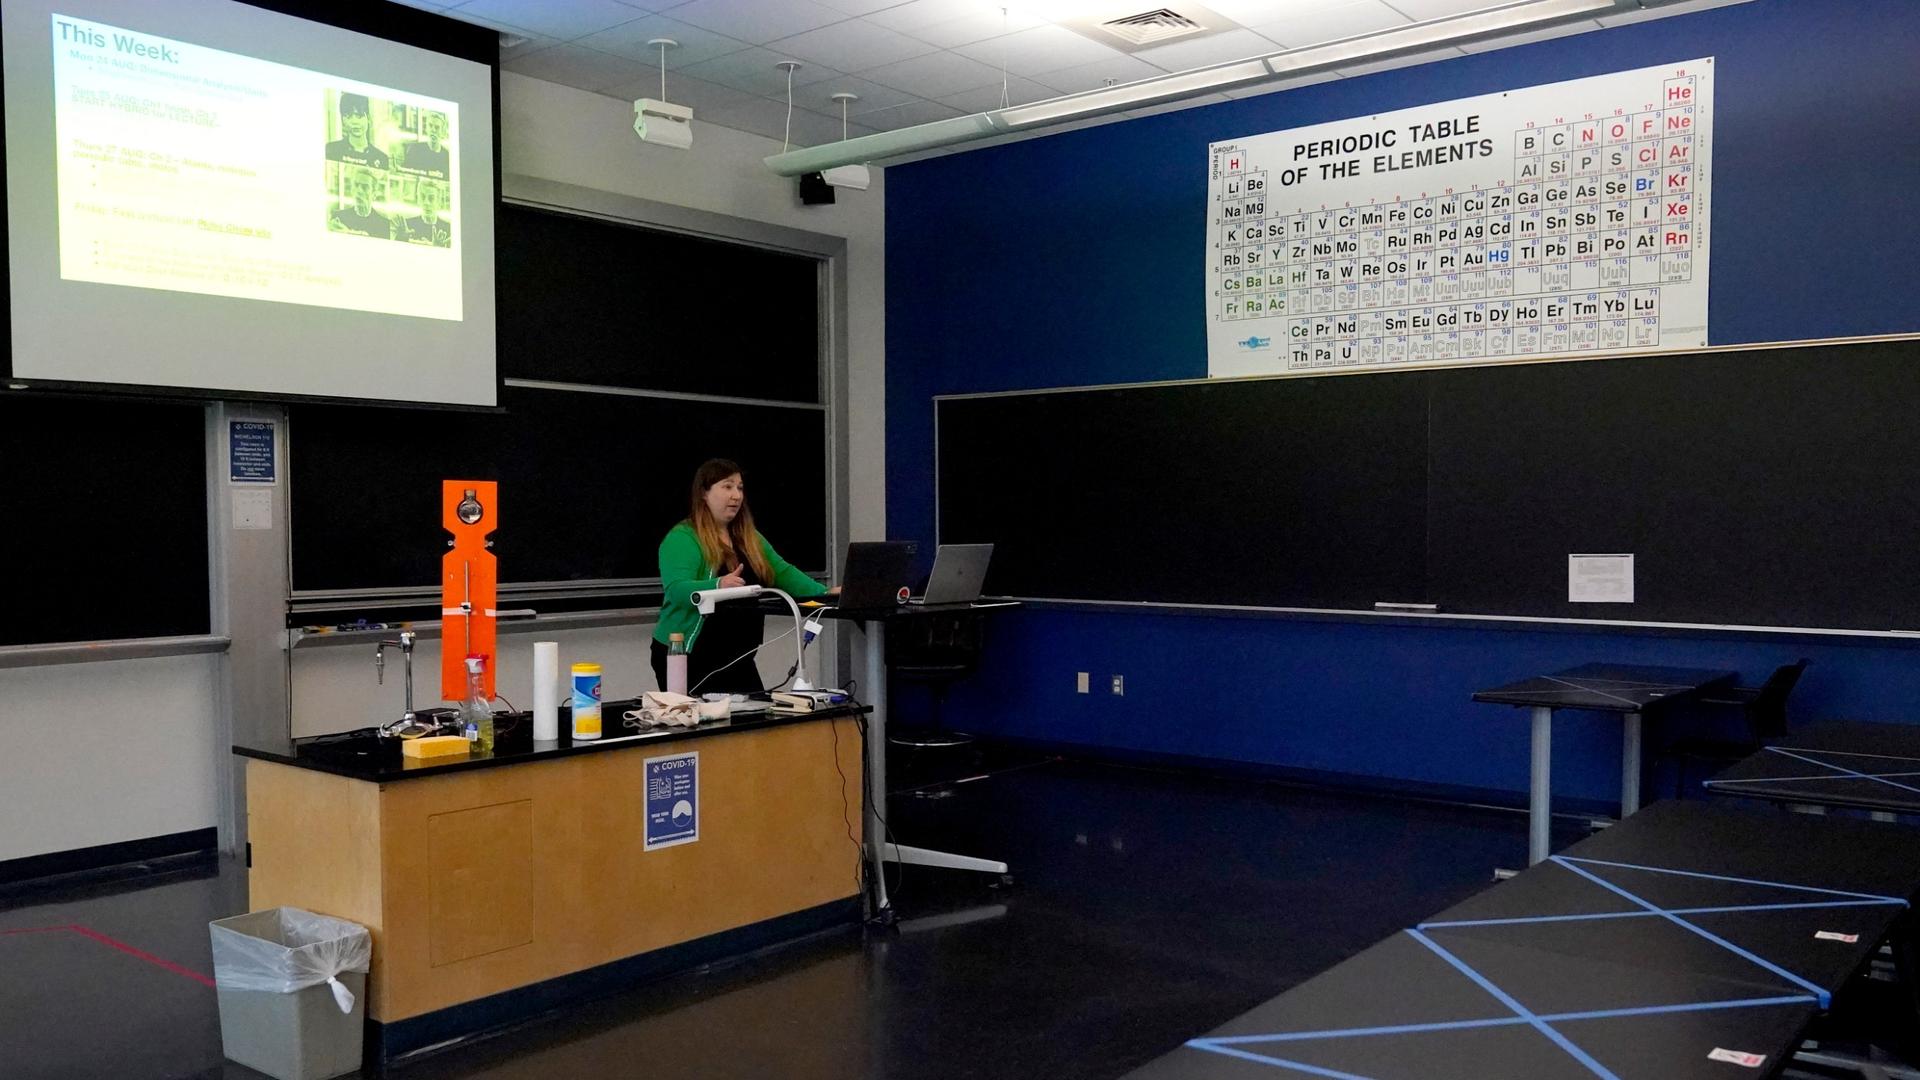 Sections of a table are seen blocked off with tape as assistant professor Jennifer Guerard speaks into laptops while teaching a foundations of chemistry remote class at the US Naval Academy, Aug. 24, 2020, in Annapolis, Md.